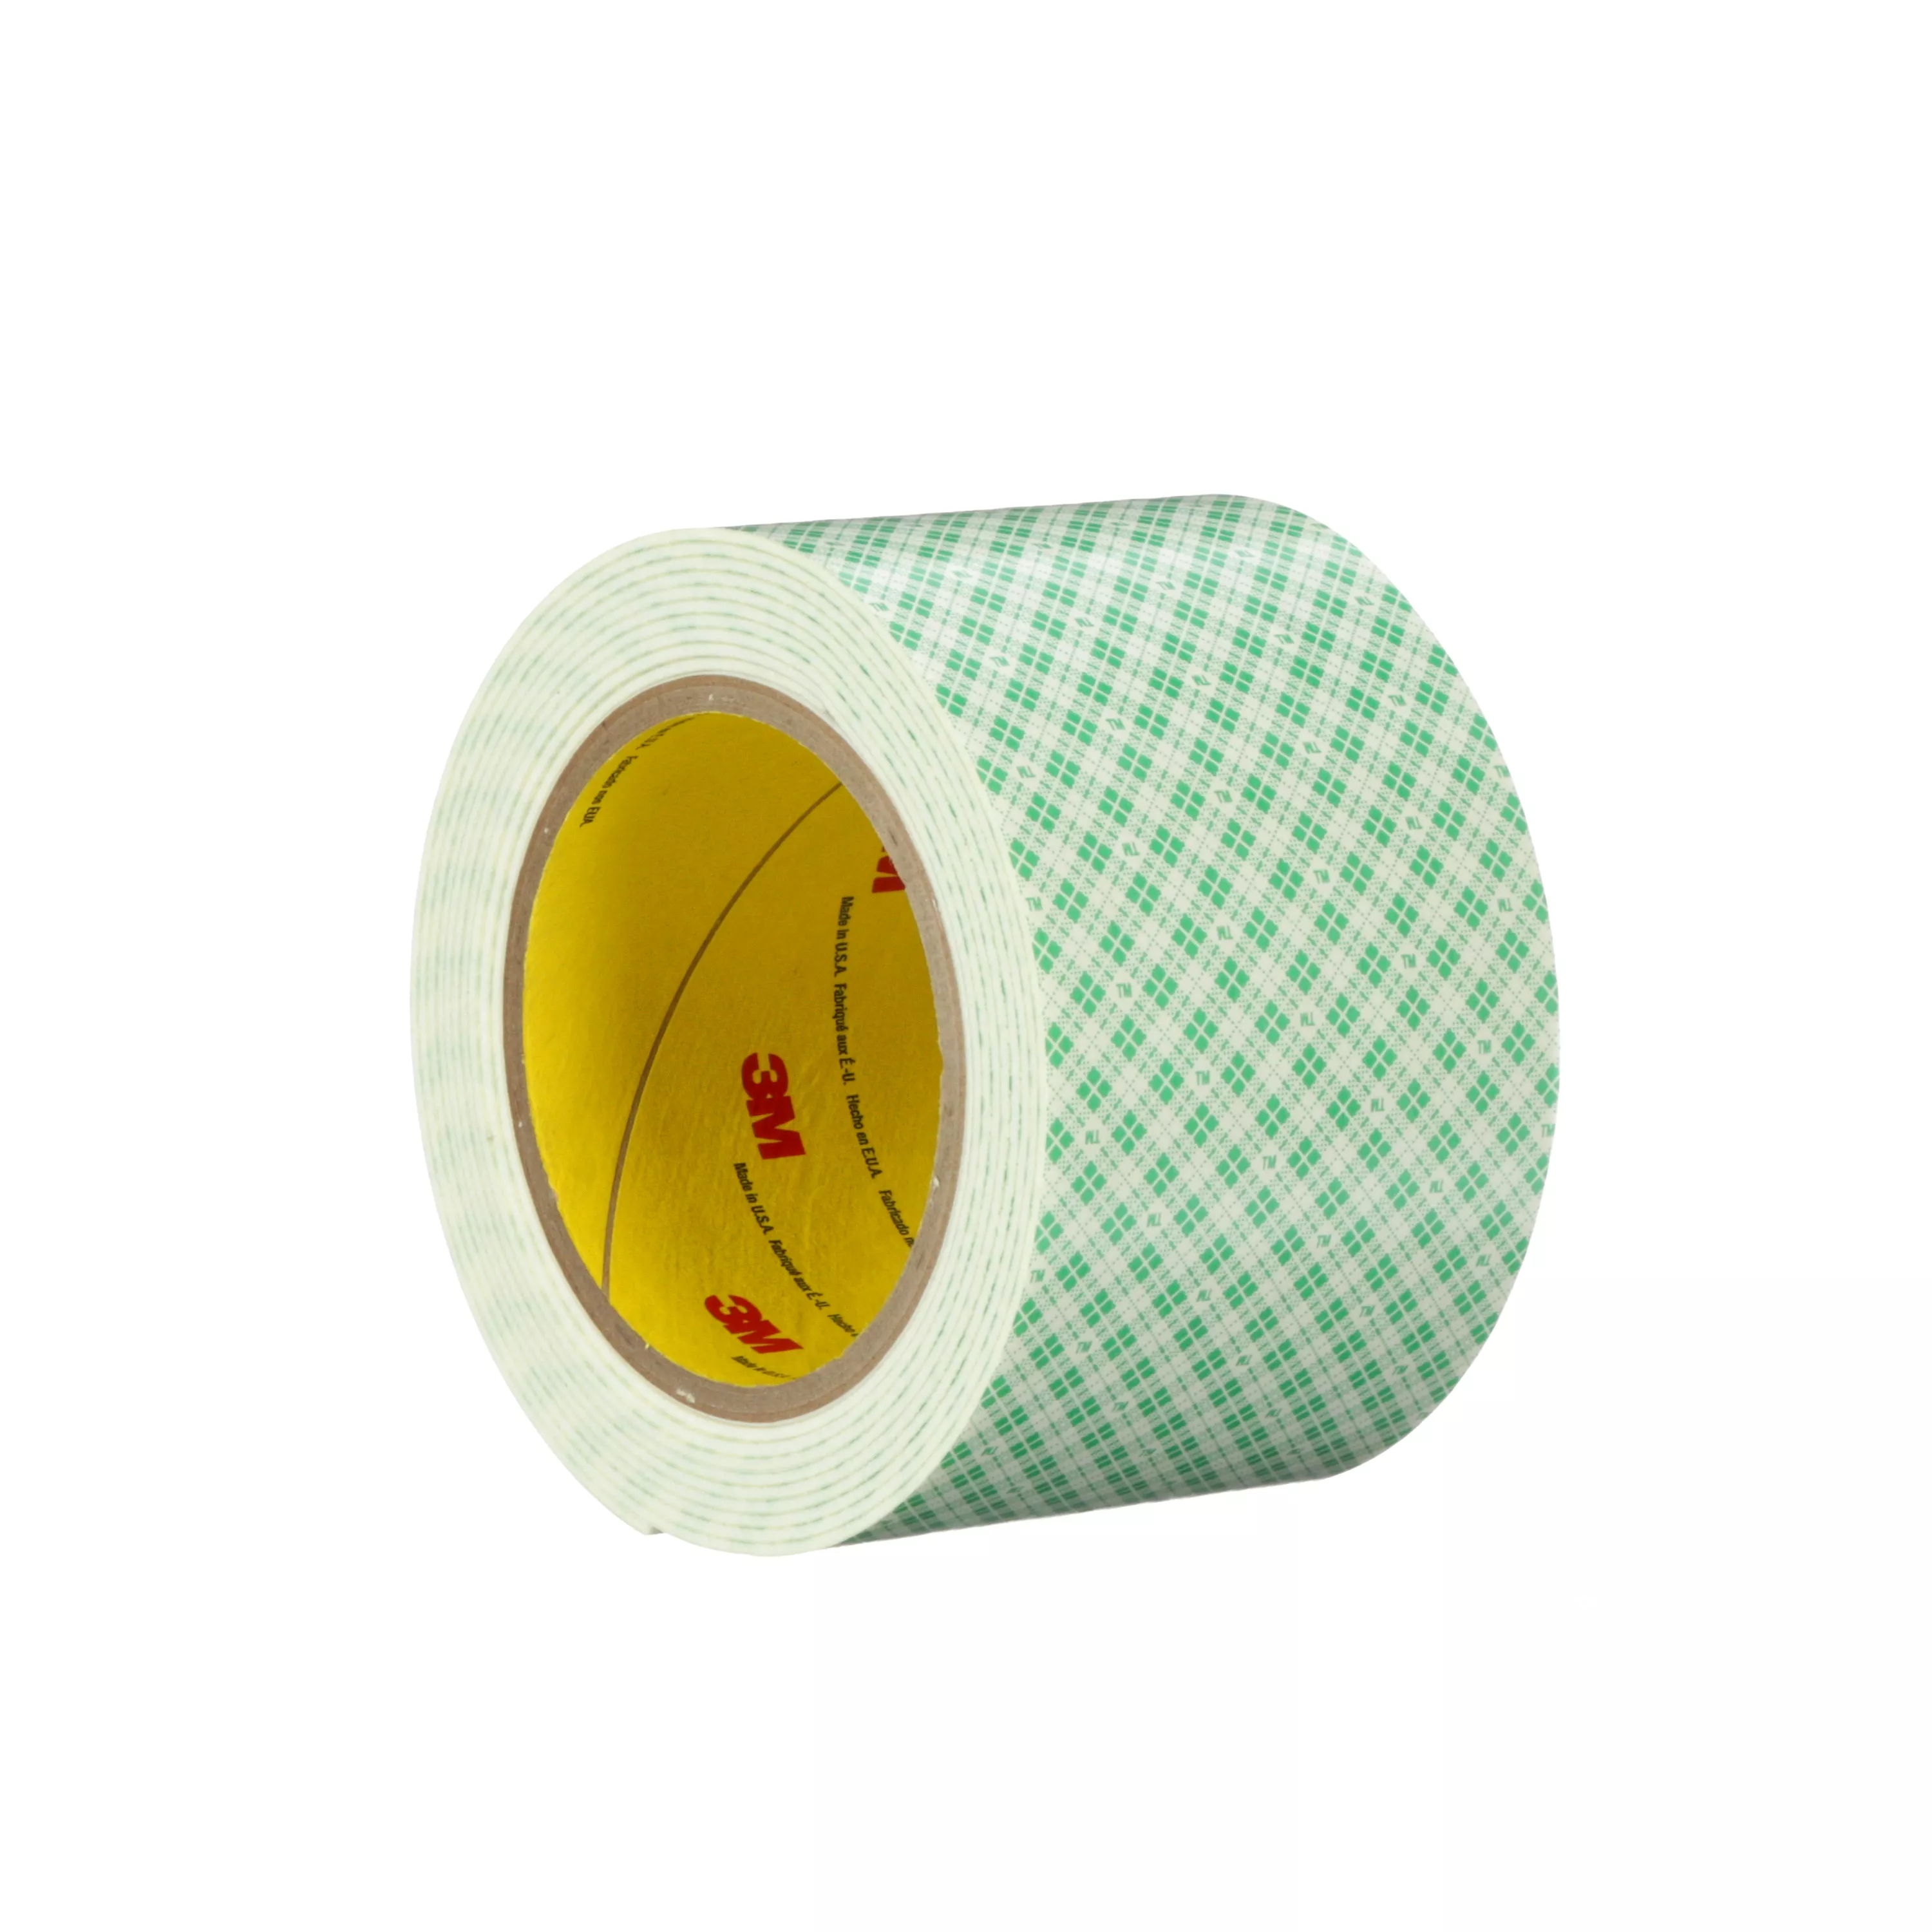 3M™ Double Coated Urethane Foam Tape 4026, Natural, 24 in x 36 yd, 62
mil, 1 Roll/Case